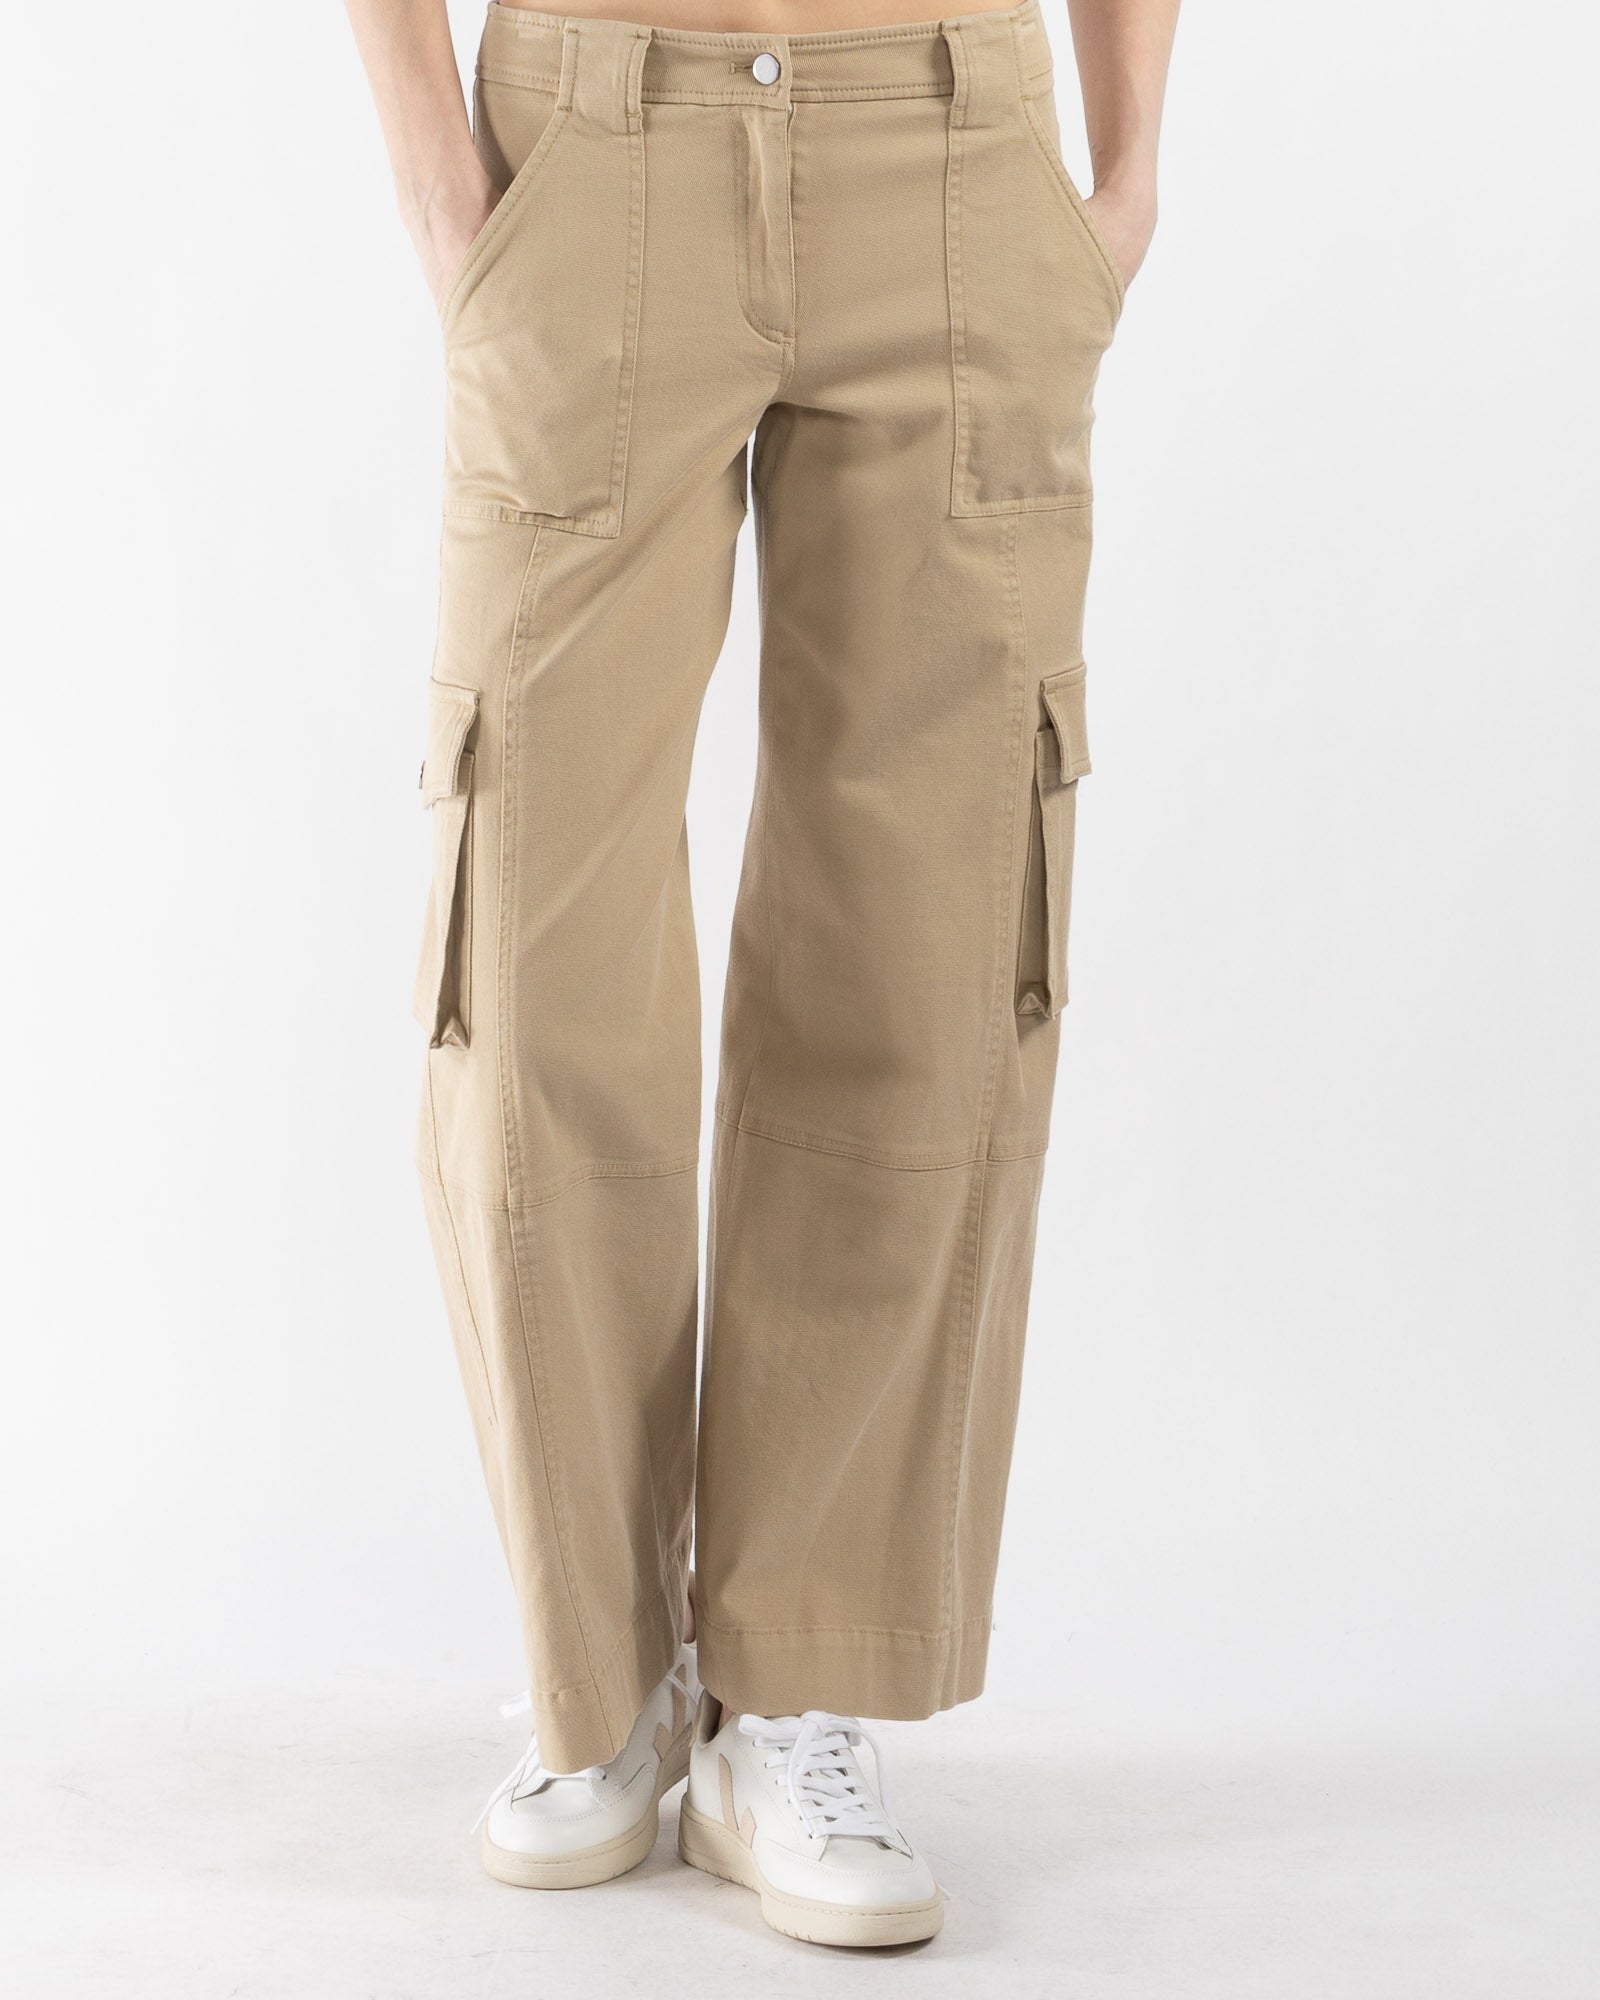 Cargo pants, Collection 2023